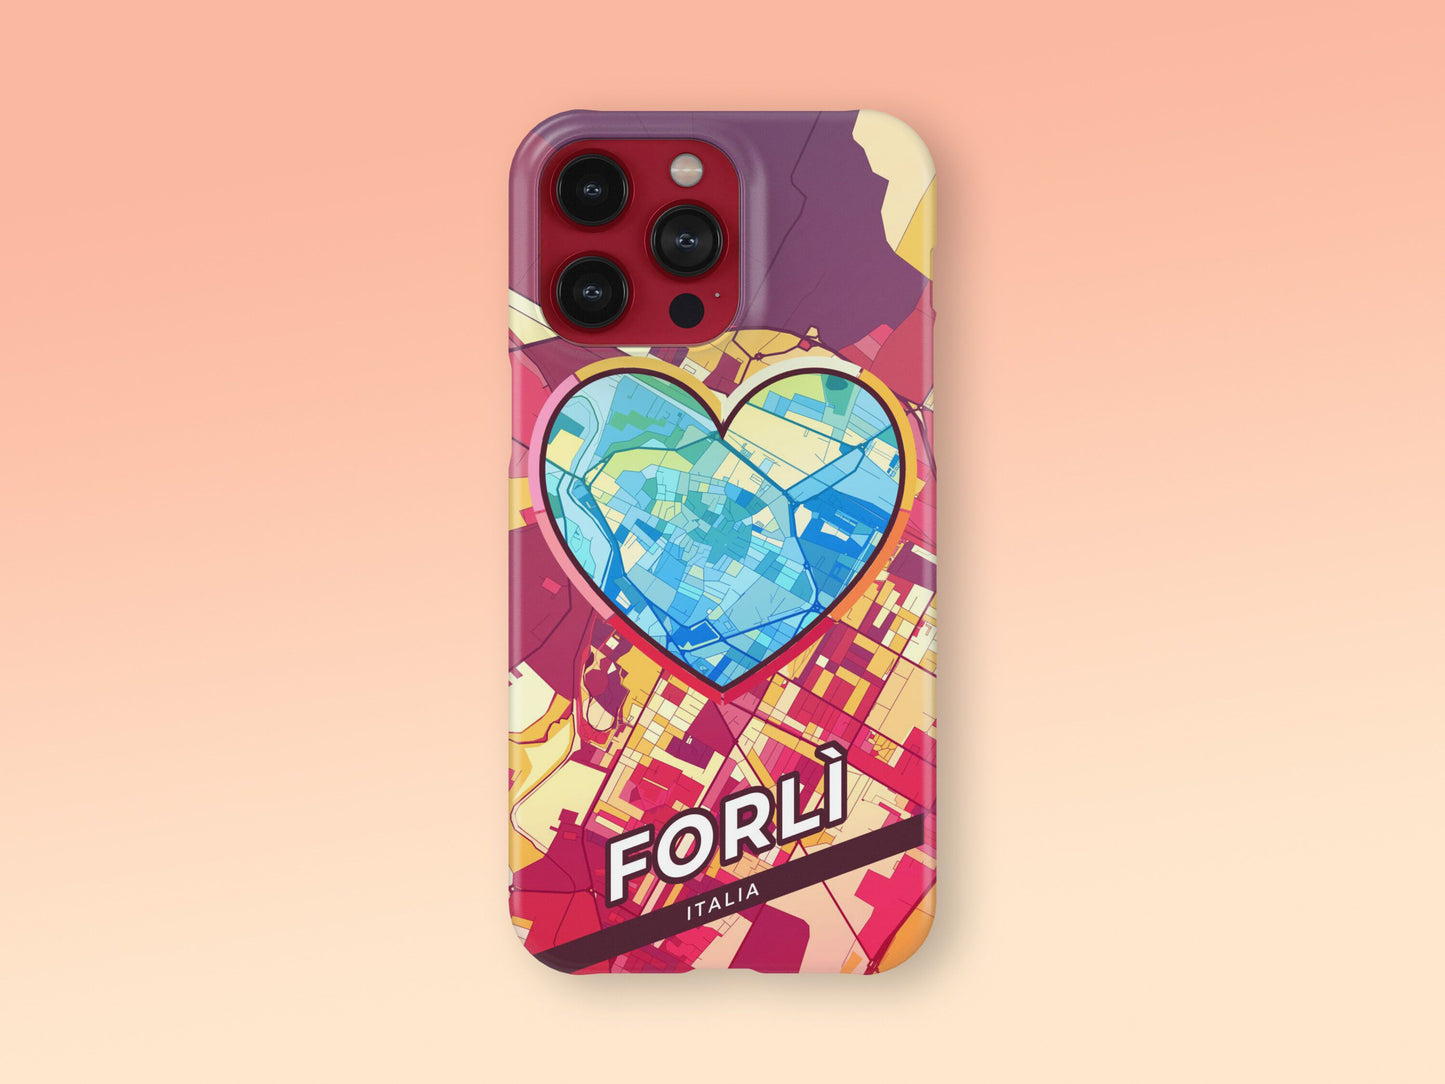 Forlì Italy slim phone case with colorful icon. Birthday, wedding or housewarming gift. Couple match cases. 2